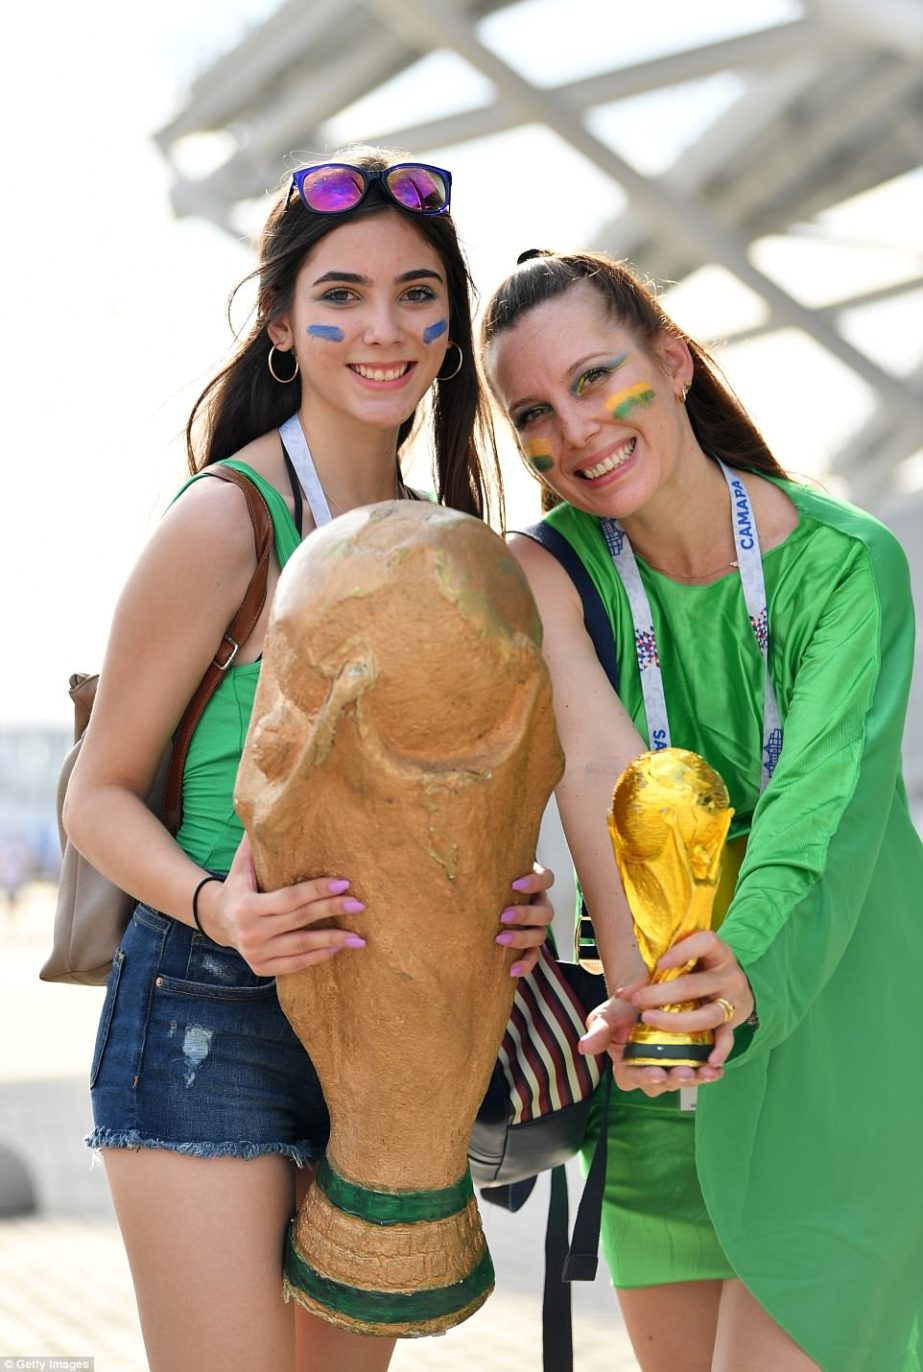 Brazillian fans gather at the Samara Arena in Russia to witness the country's match against Mexico on Monday.